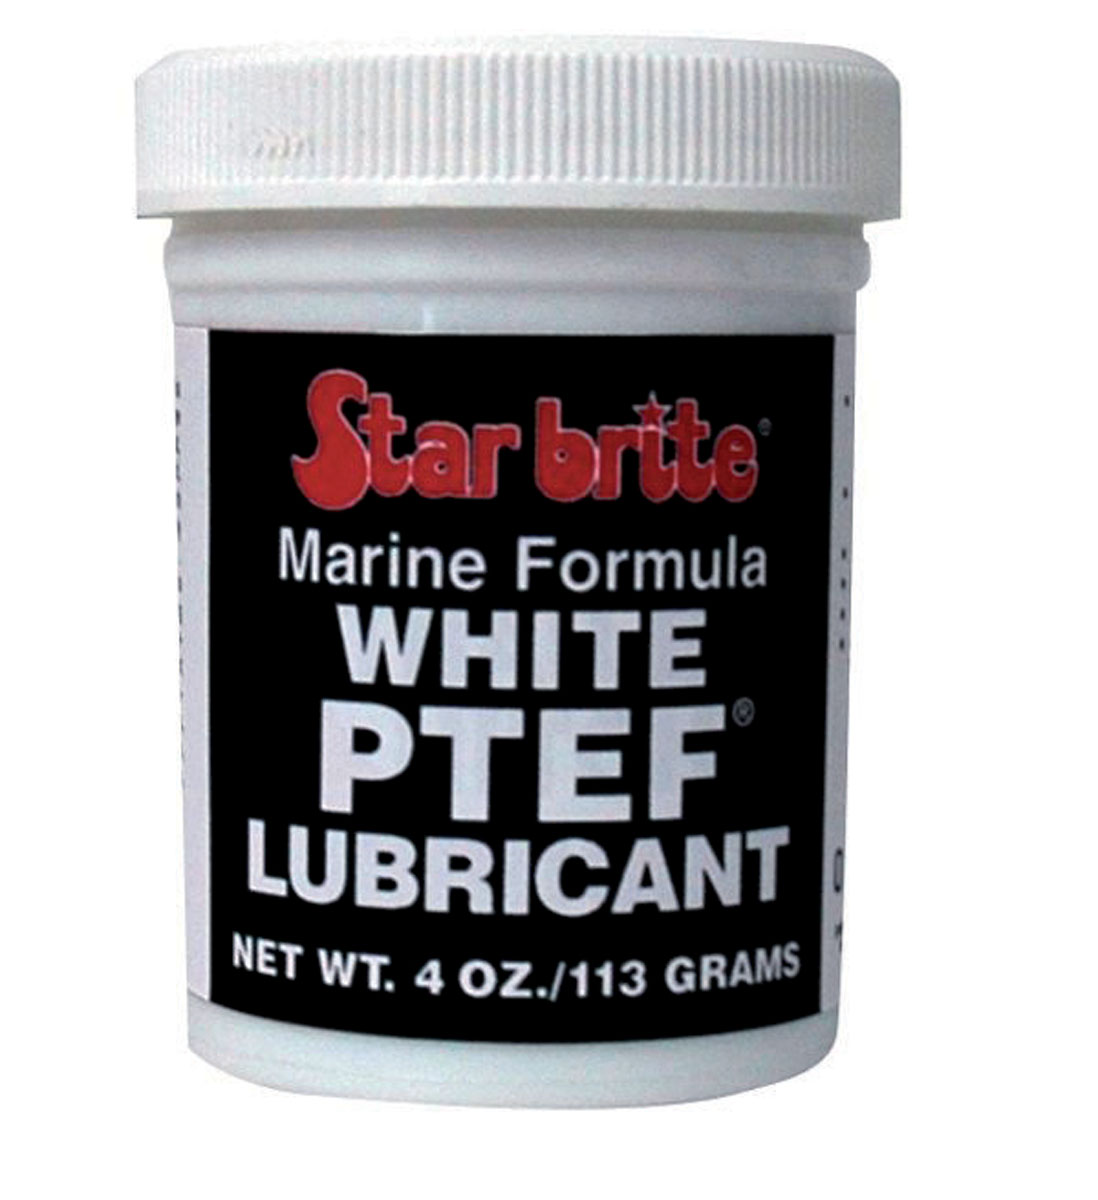 White PTEF-Lubricant